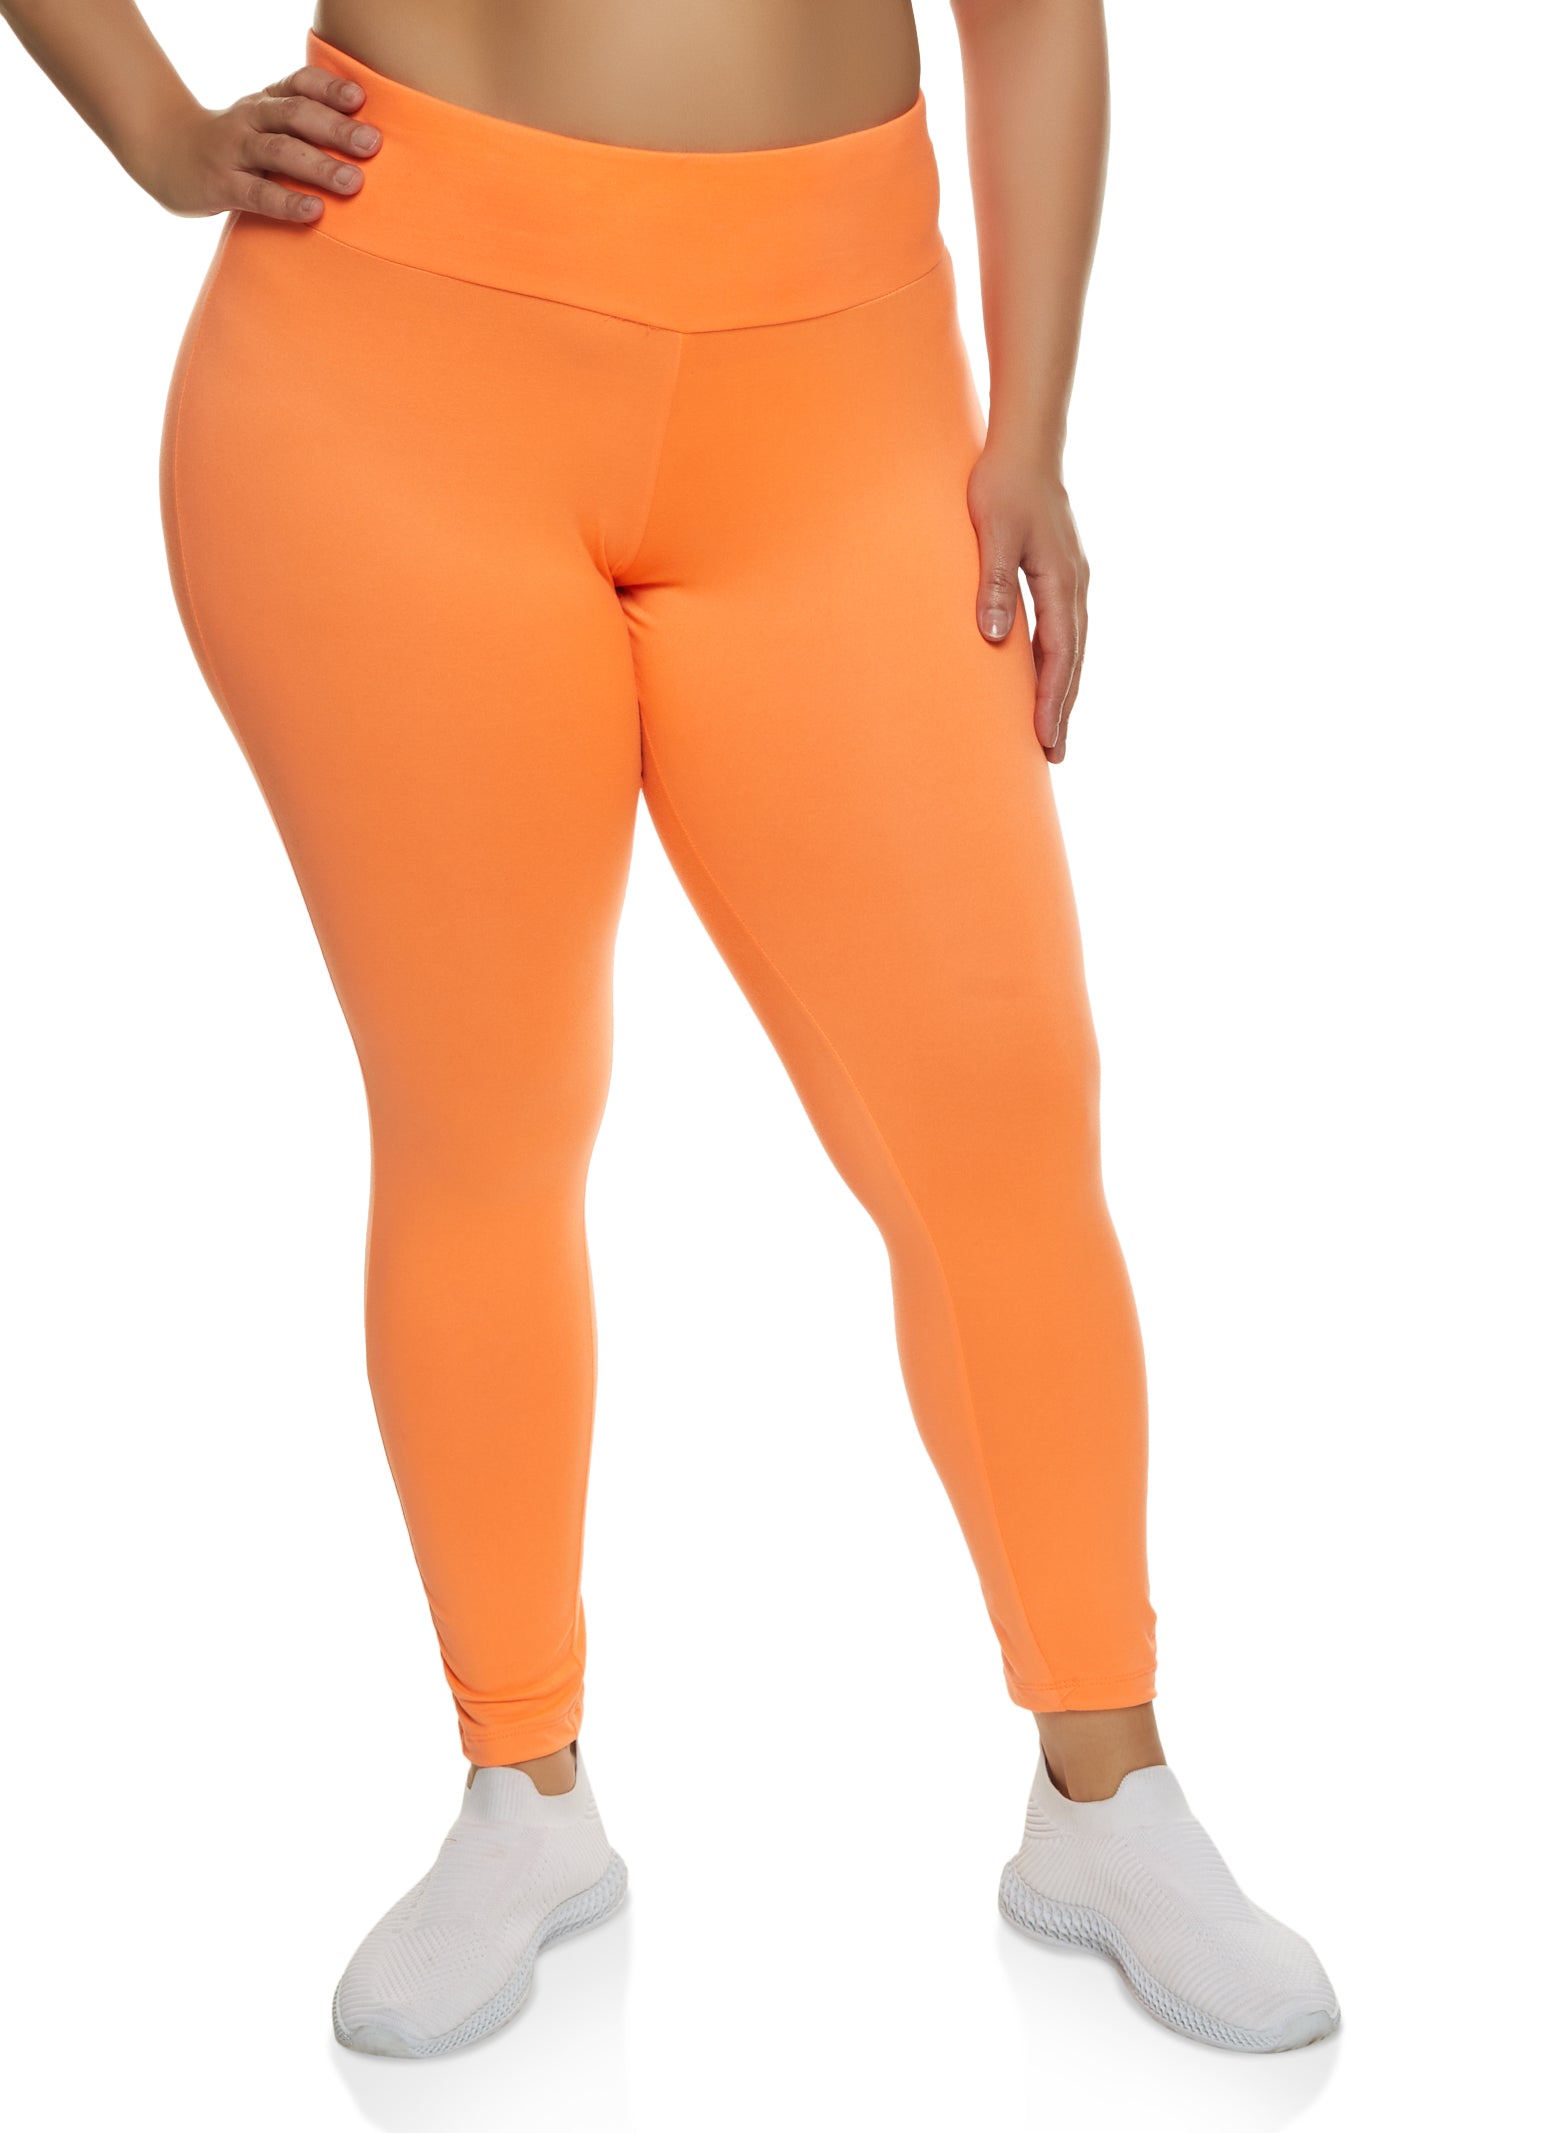 Fabletics High-Waisted PureLuxe Crossover 7/8 Legging Womens orange plus  Size 4X | The Summit at Fritz Farm